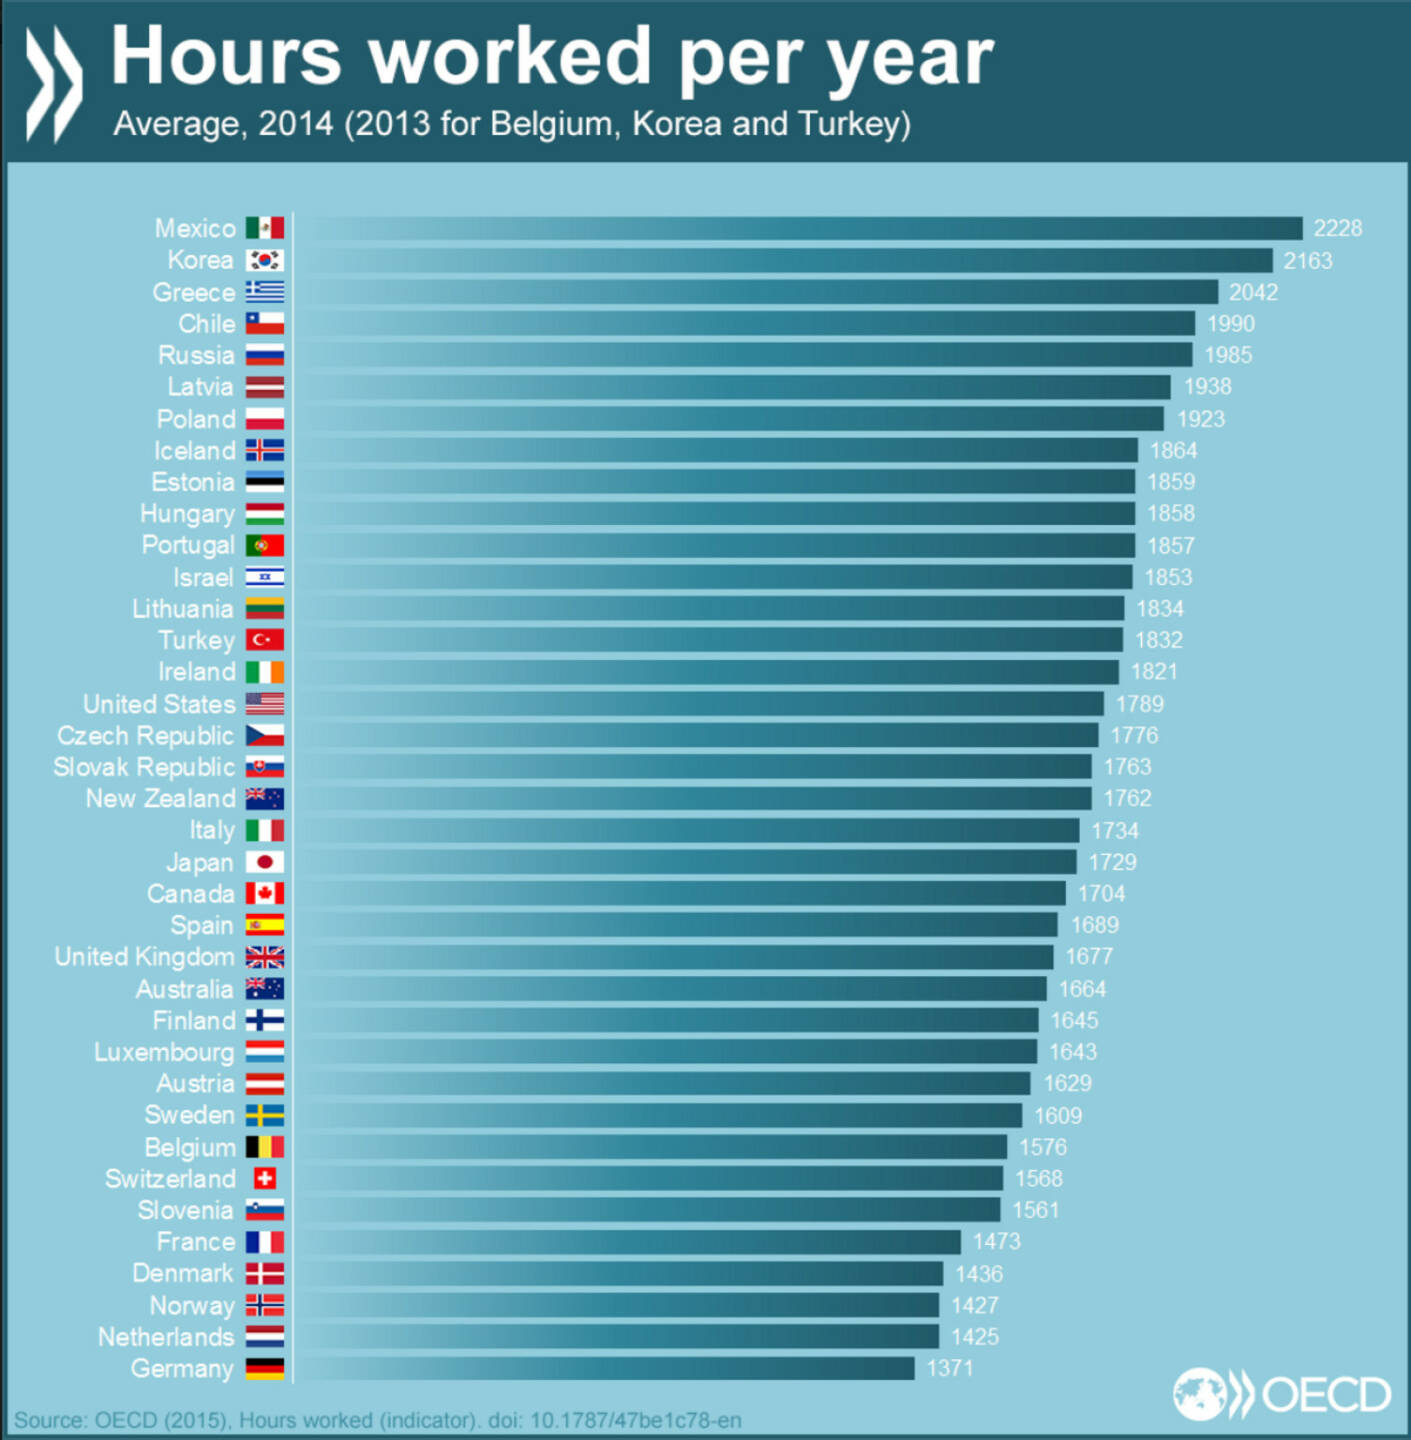 Our top Facebook post in 2015 was:
Monday morning blues? Compare the average number of working hours per year with other countries. More info at http://bit.ly/1JPVYQu